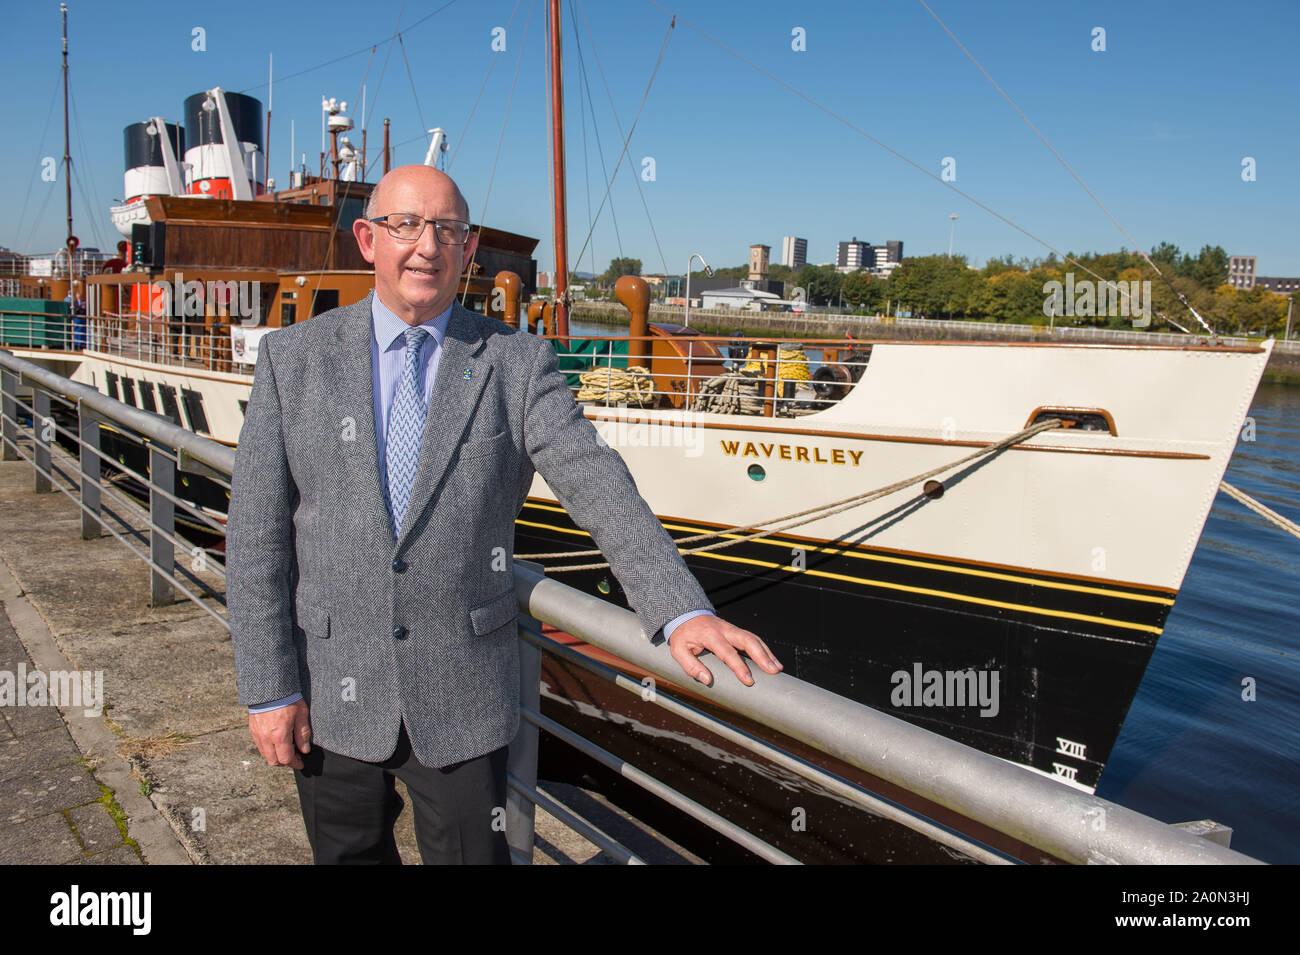 Glasgow, UK. 21 September 2019. PICTURED: Dr Cameron Marshall - Chairman of Waverley Excursions & Director for Waverley Steam Navigation Co.  The last sea-going paddle steamer in the world will receive £1 million of Scottish Government funding to help it sail again, Culture Secretary Fiona Hyslop has announced.  The Waverley Paddle Steamer has been in operation for over 70 years, transporting millions of passengers to a variety of locations throughout the UK but is currently out-of-service and urgently requires new boilers.  Credit: Colin Fisher/Alamy Live News. Stock Photo